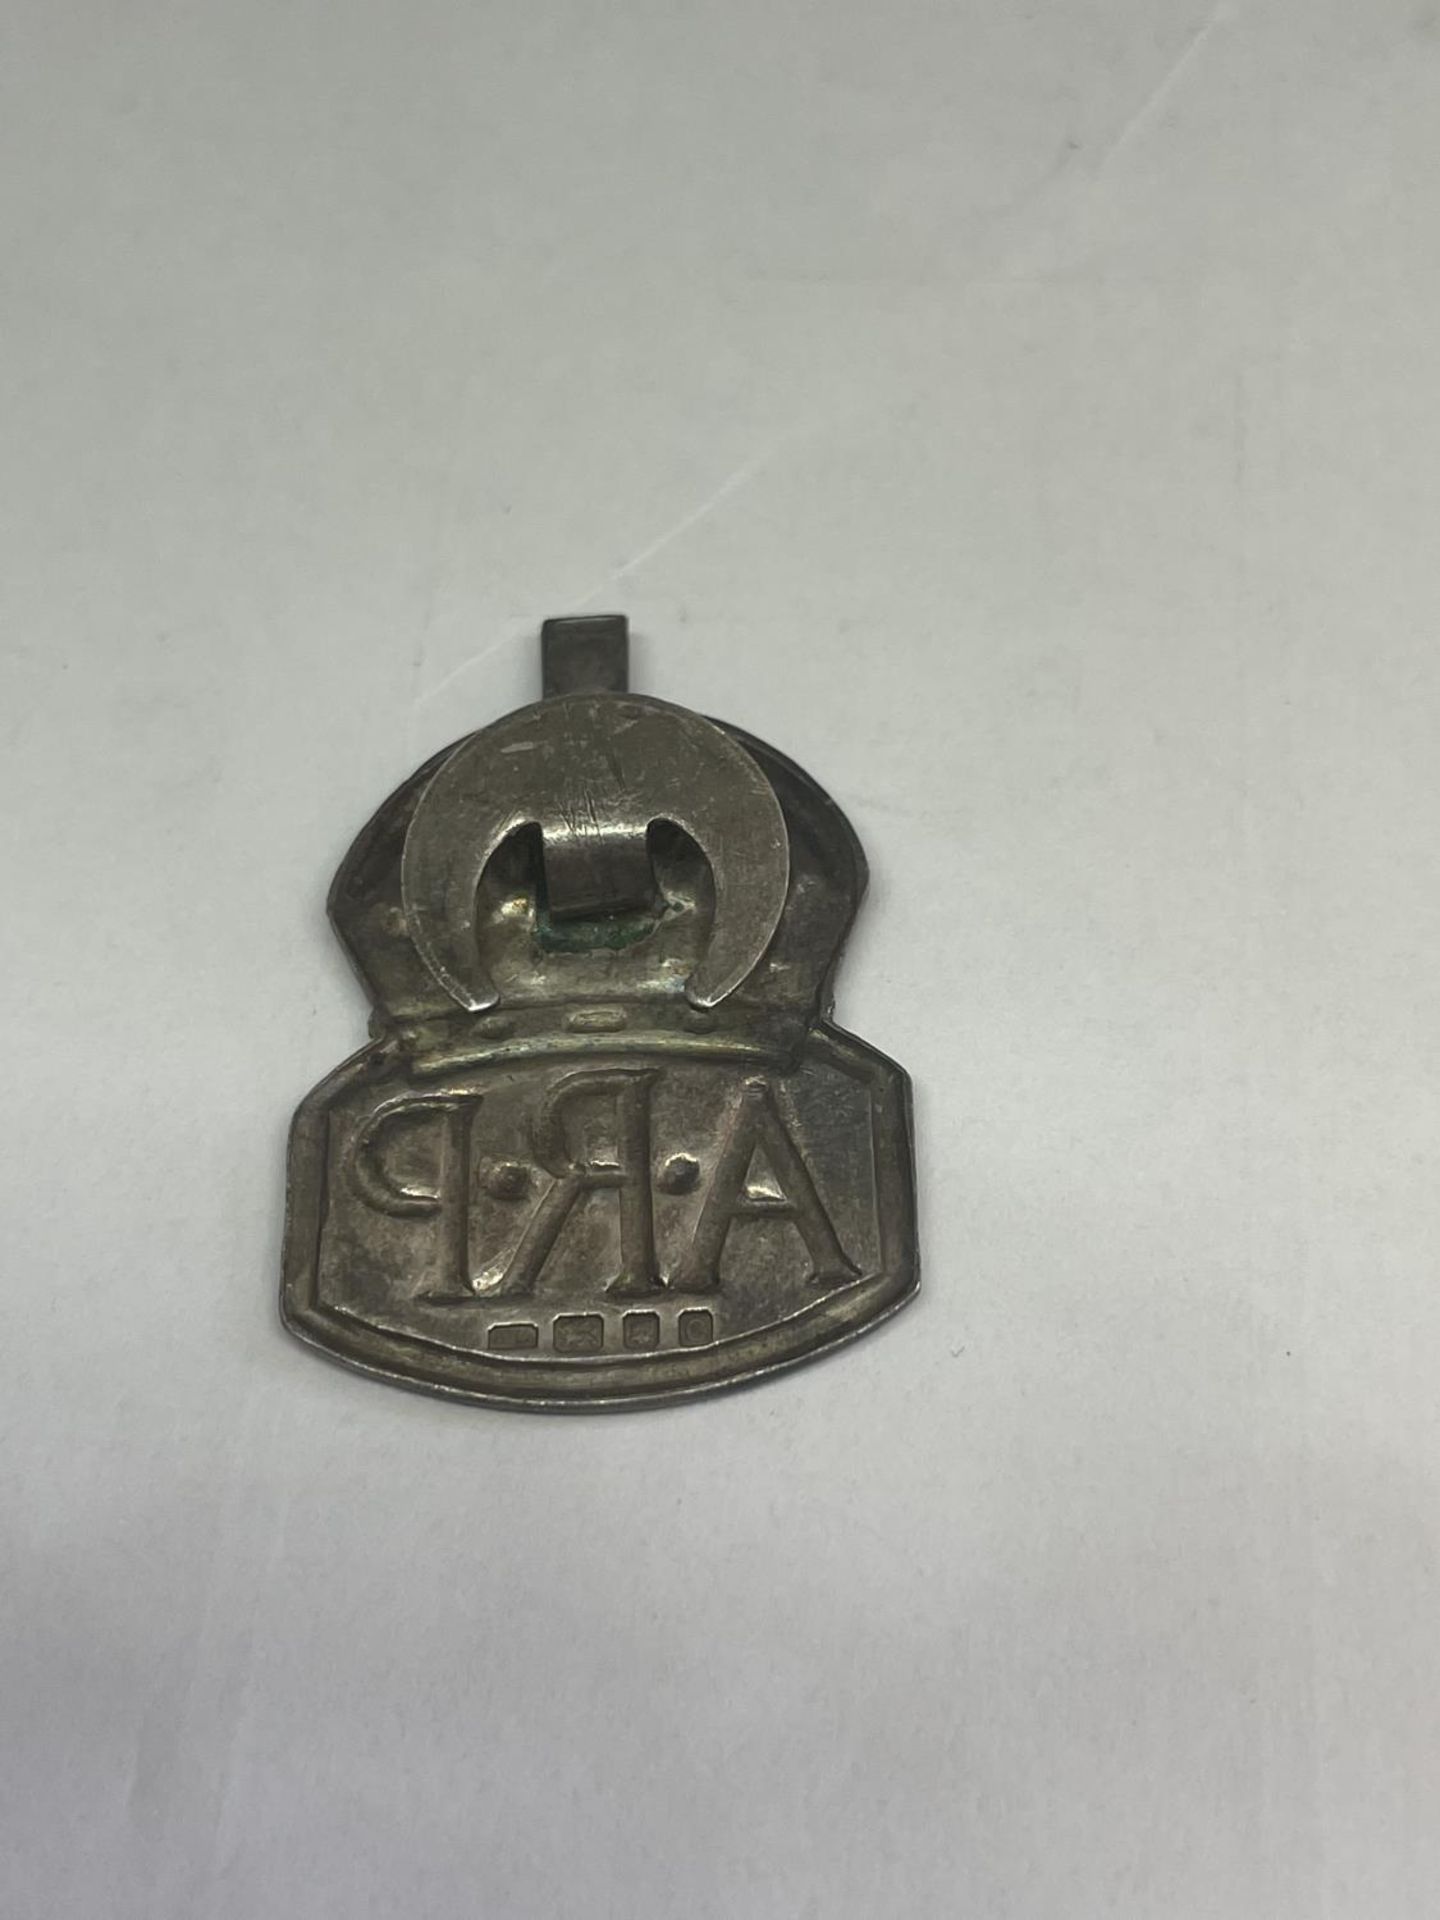 A SILVER WW2 A.R.P. BADGE - Image 2 of 2